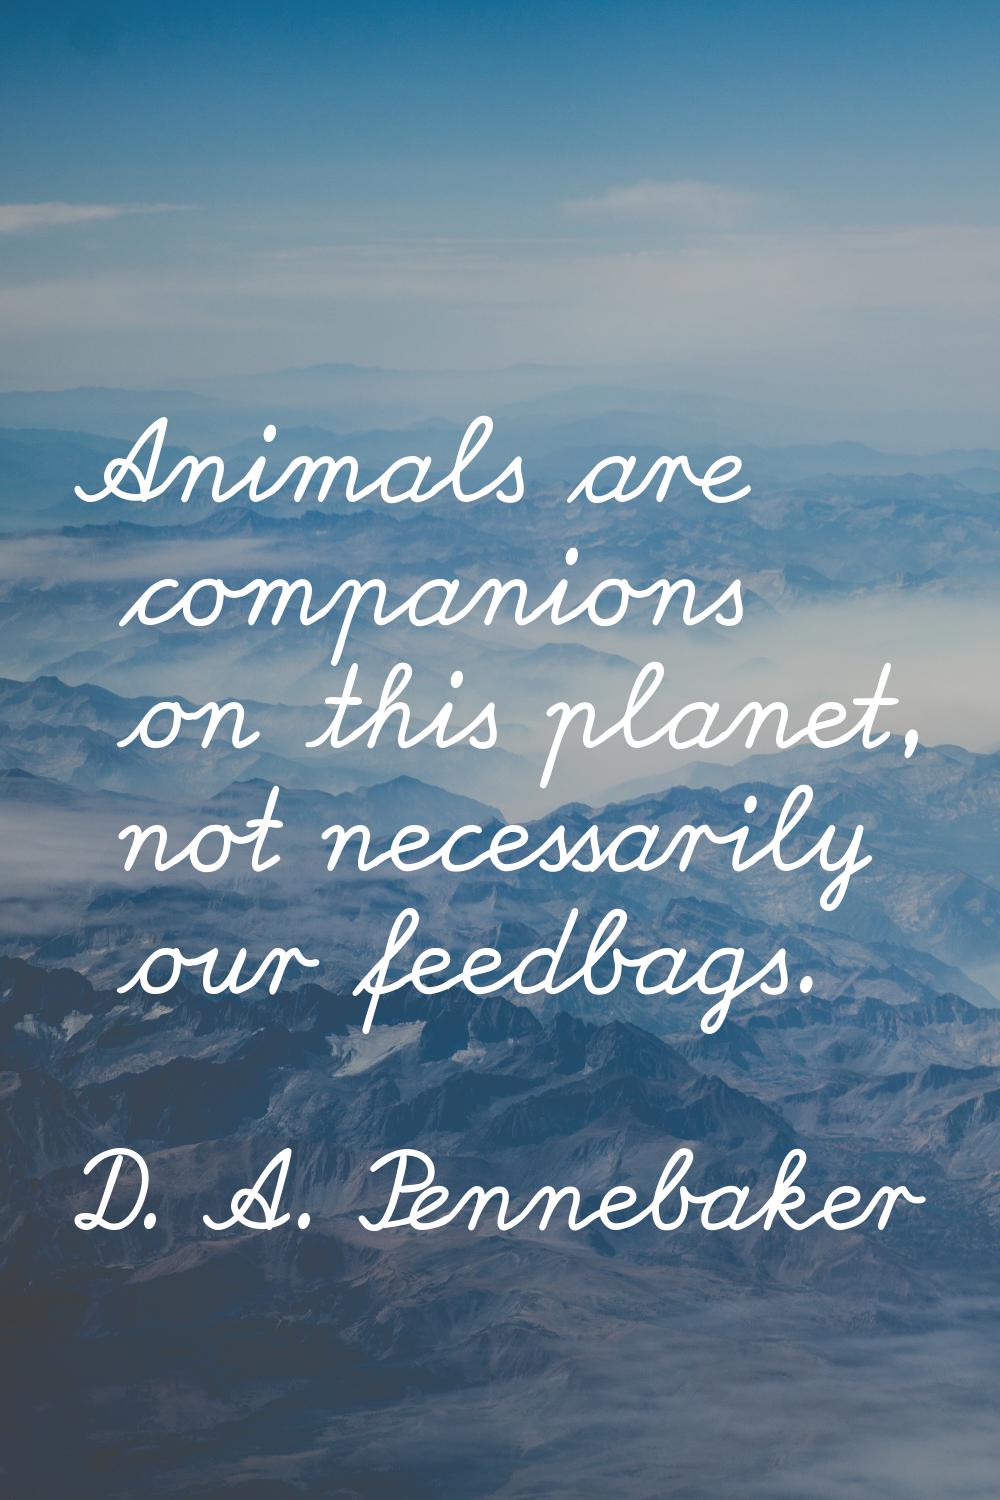 Animals are companions on this planet, not necessarily our feedbags.